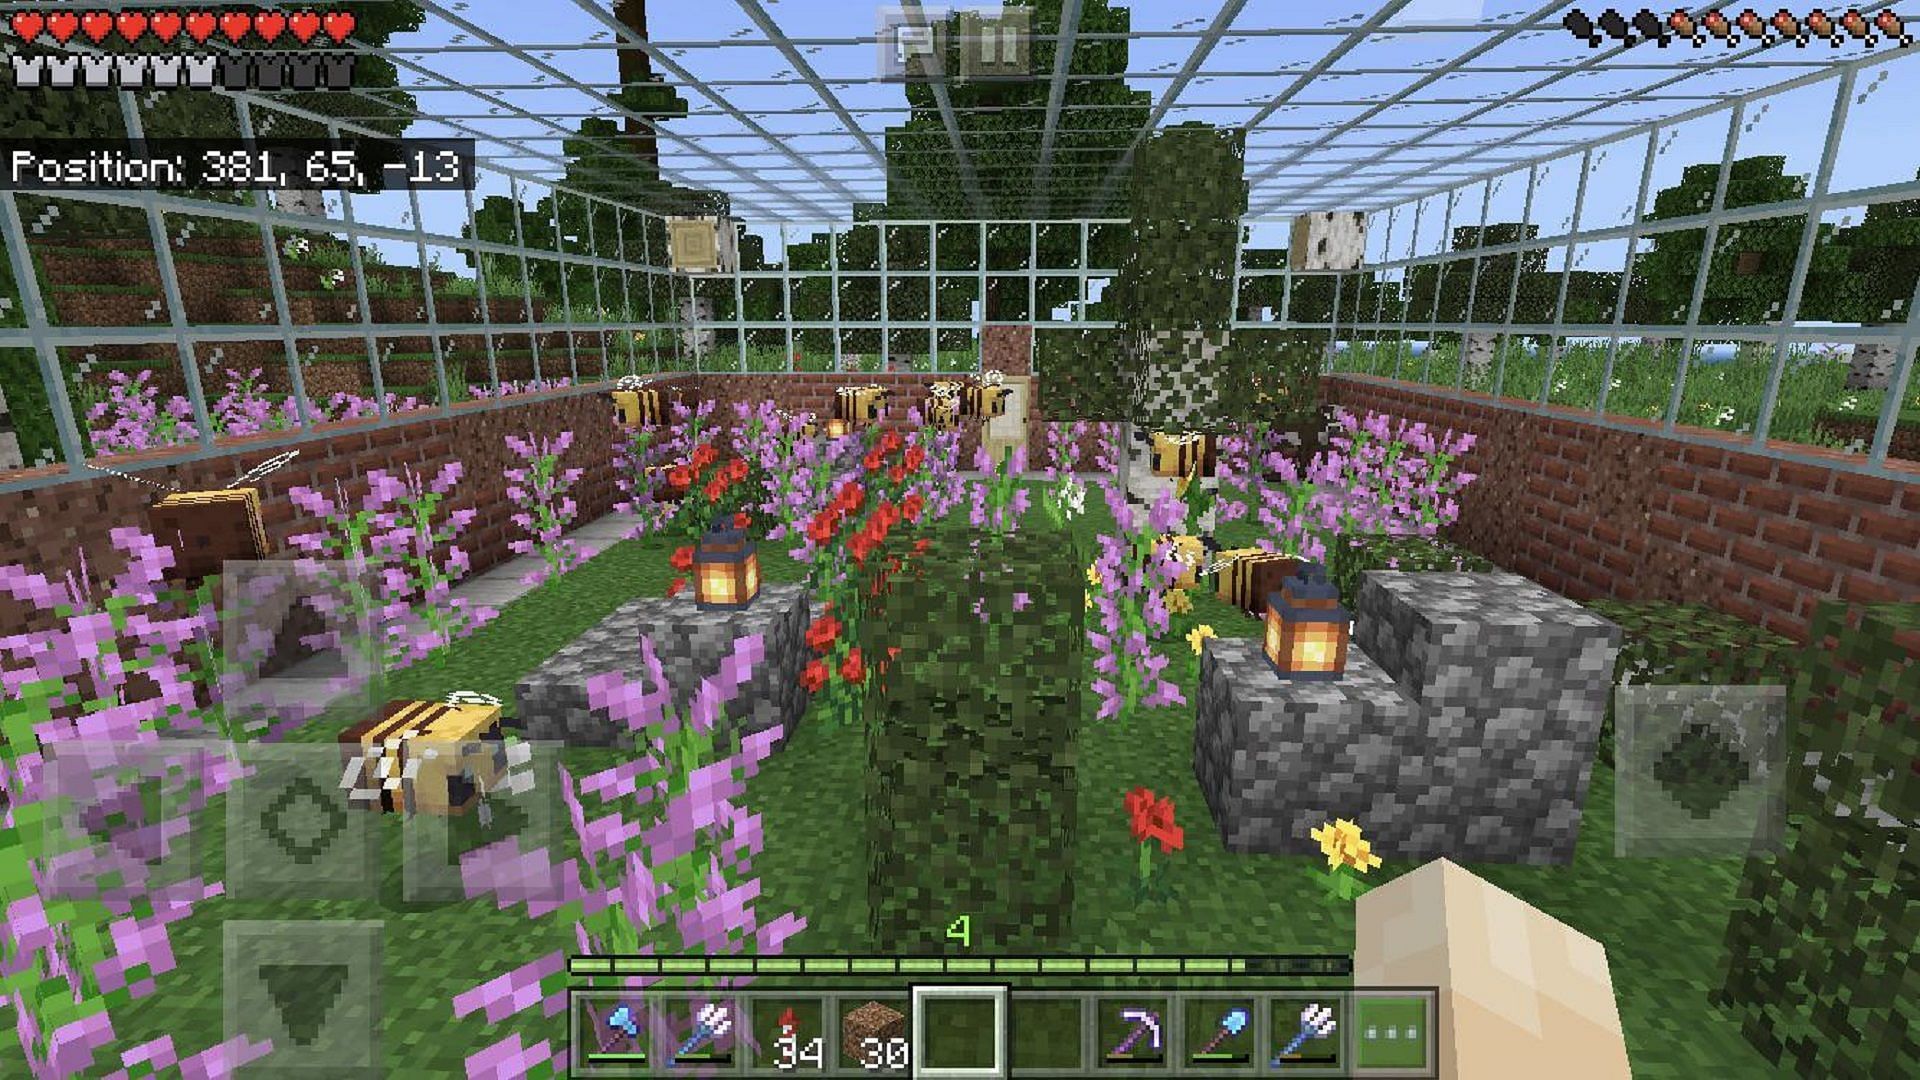 Bees can be used to easily farm a ton of honey in Minecraft (Image via PeePeeYeah/Reddit)